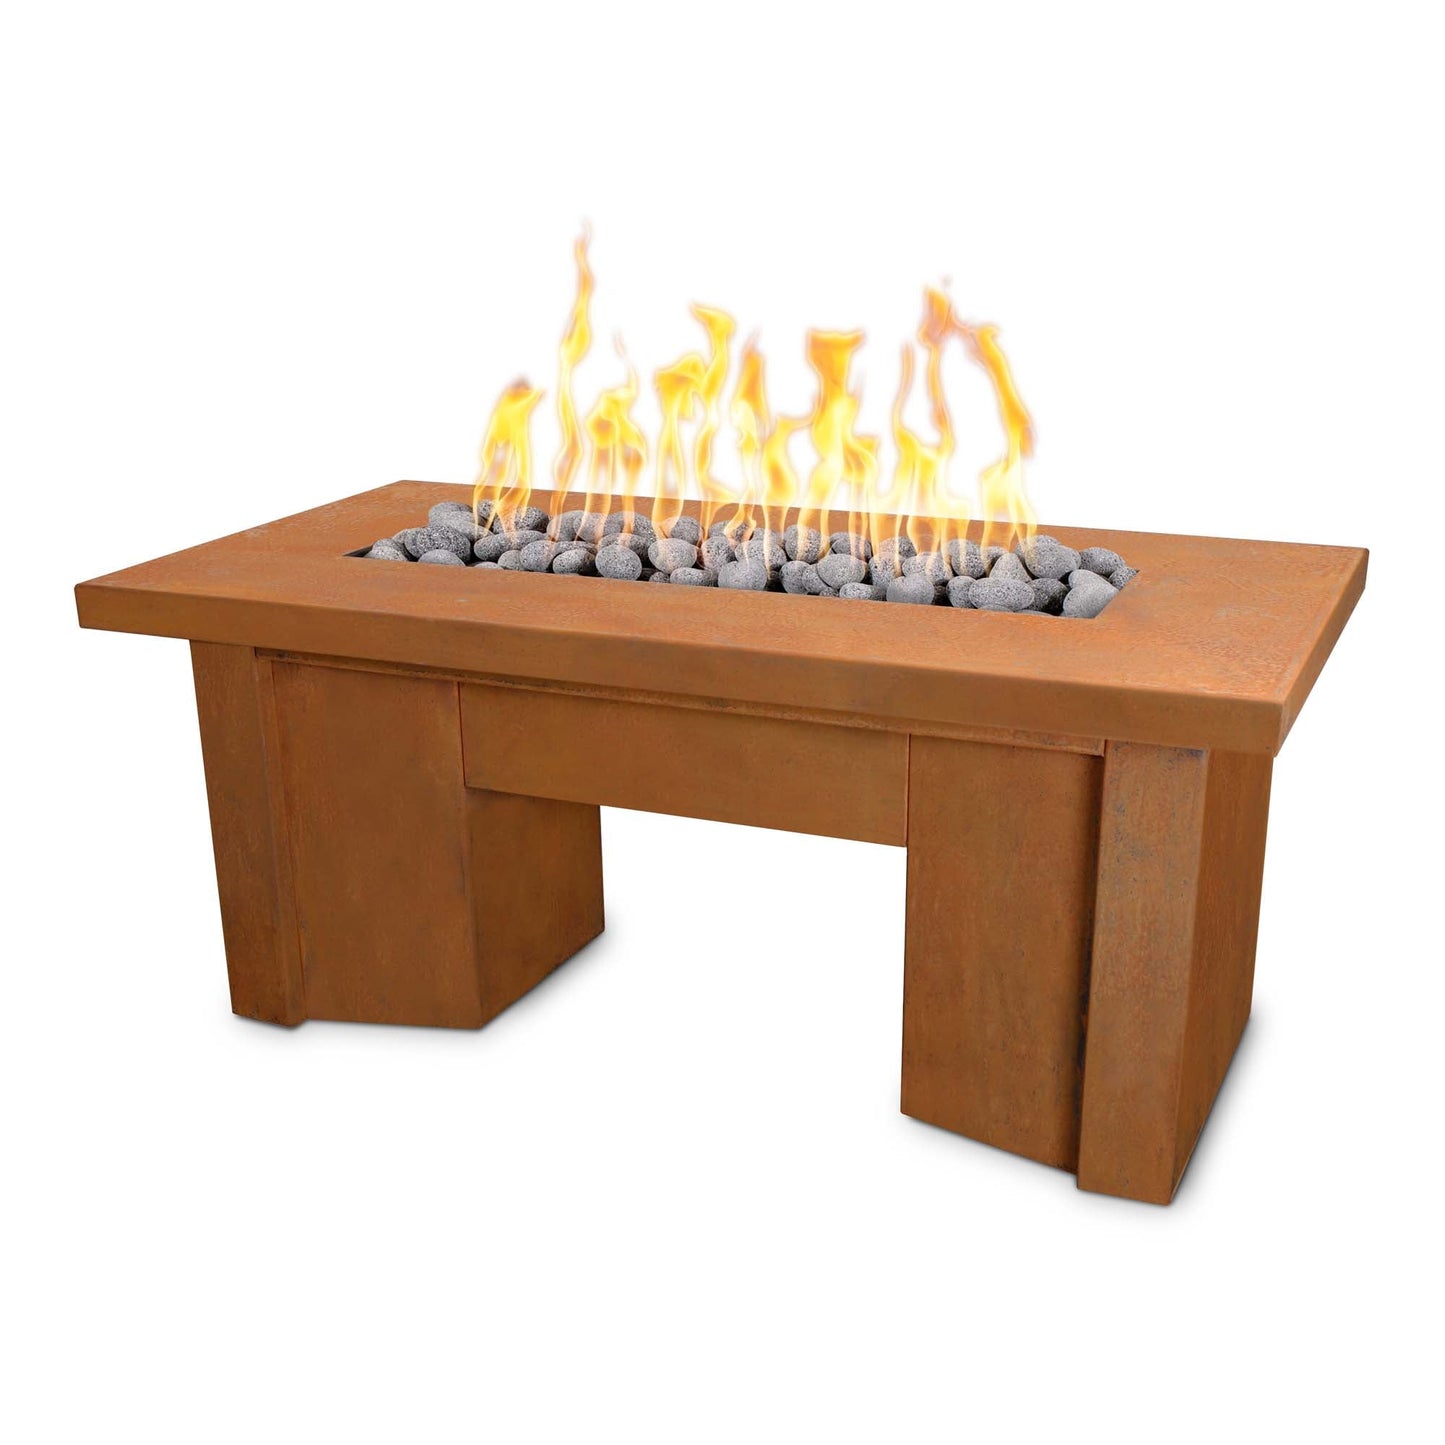 The Outdoor Plus Rectangular Alameda 60" Corten Steel Natural Gas Fire Pit with 110V Electronic Ignition